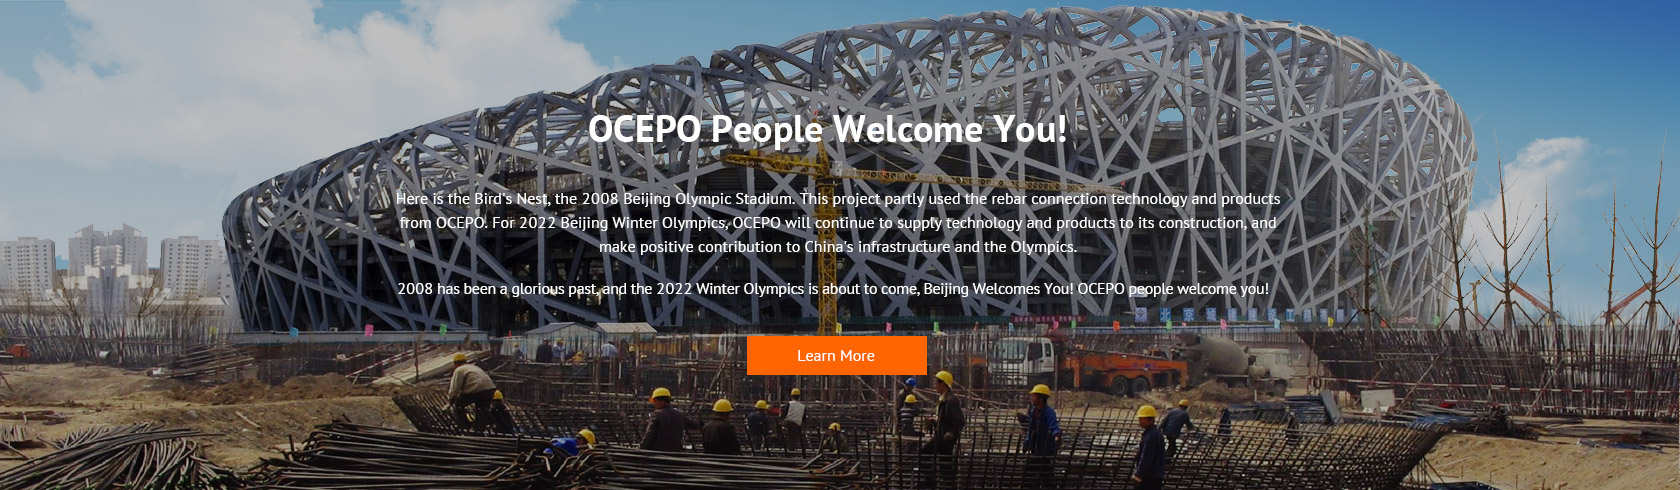 OCEPO people welcome you